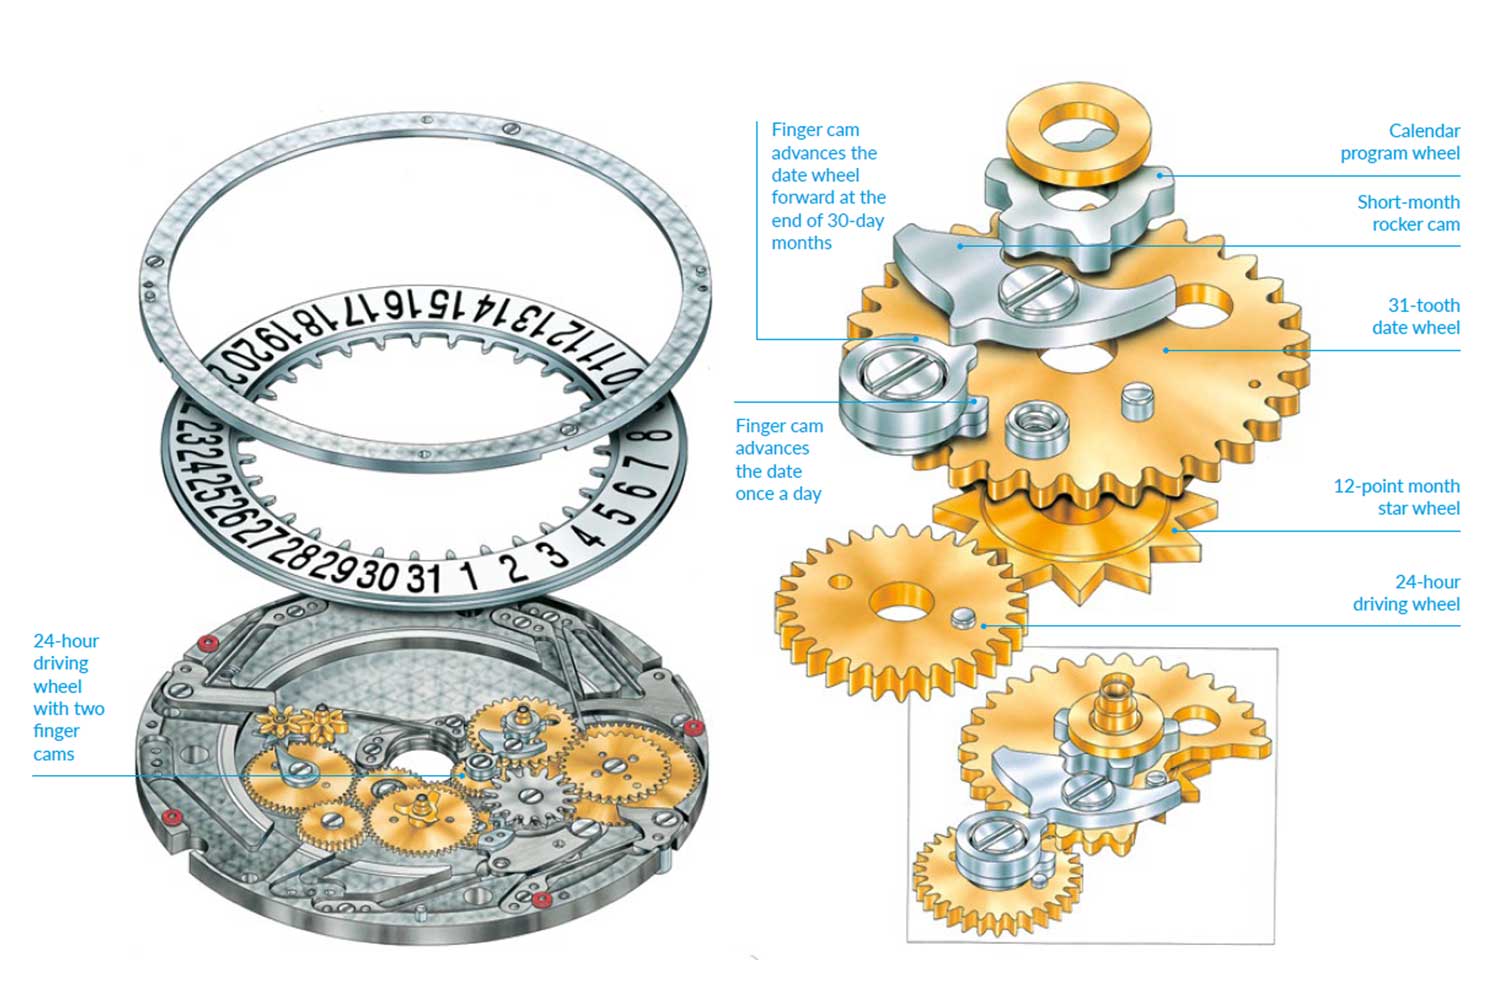 From left: Patek Philippe’s gear-based annual calendar mechanism; a core innovation patented by Patek was a 24-hour driving wheel with two “fingers” at an angle to one another. The first finger advanced the date once a day. The second finger was used for transitions from 30-day months to the 1st of the following month, allowing the display to skip the 31st